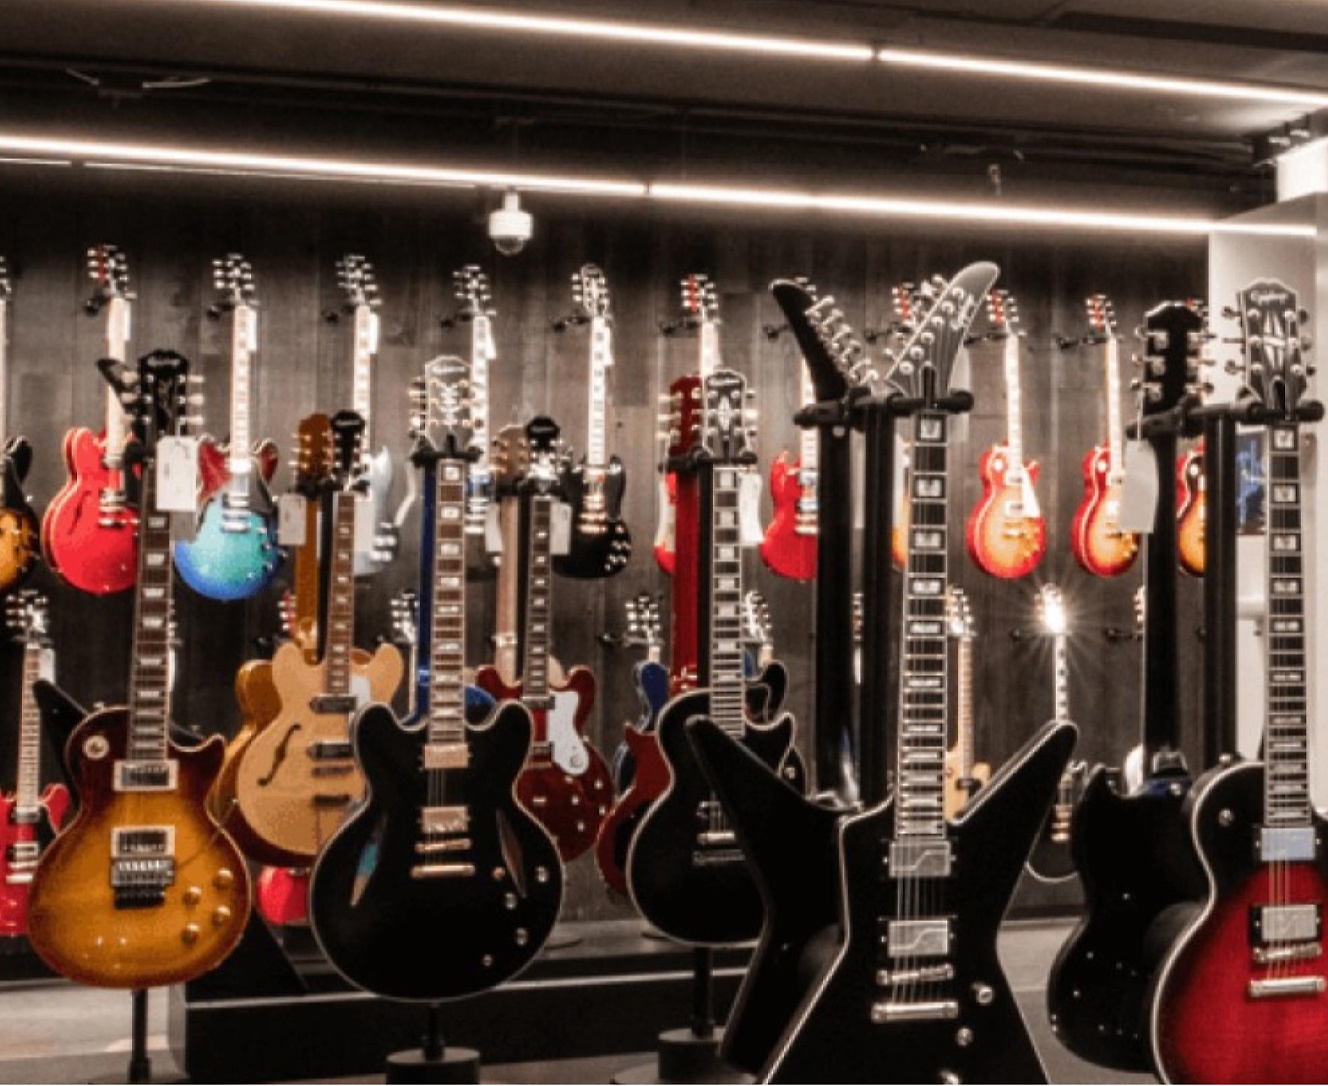 Many guitars are on display in a store.